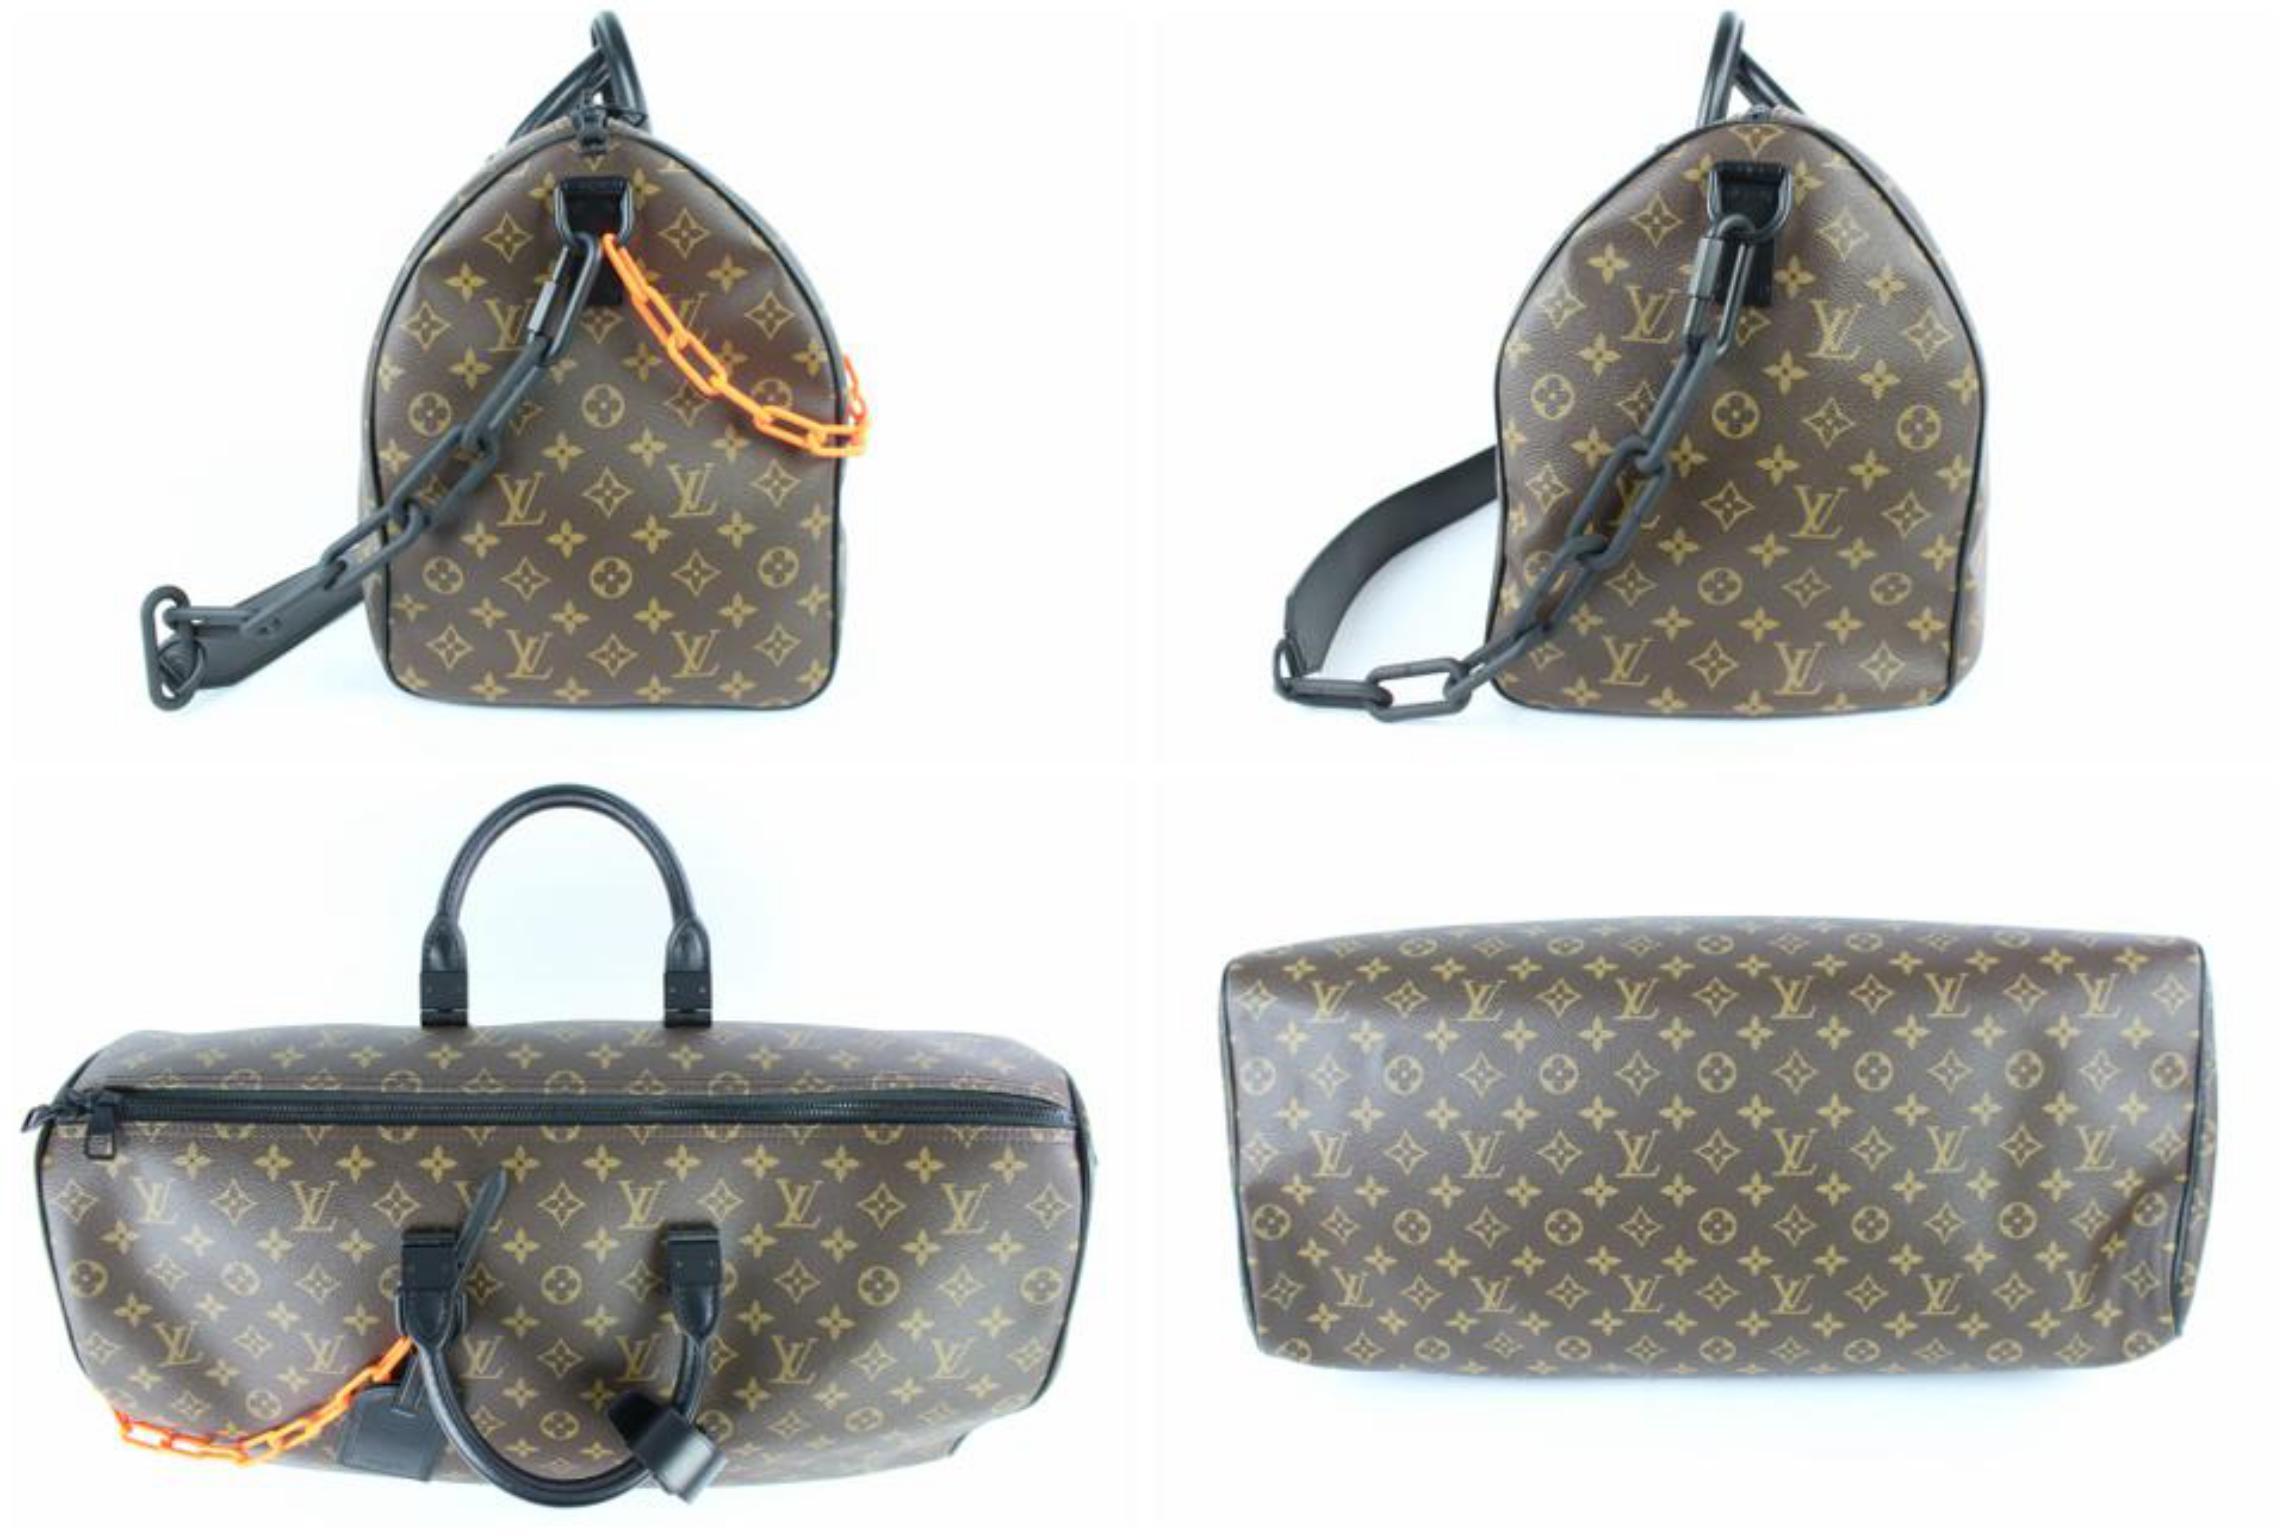 Gray Louis Vuitton Keepall Runway Virgil Abloh Ss19 Monogram Chain Bandouliere 50 3lz For Sale